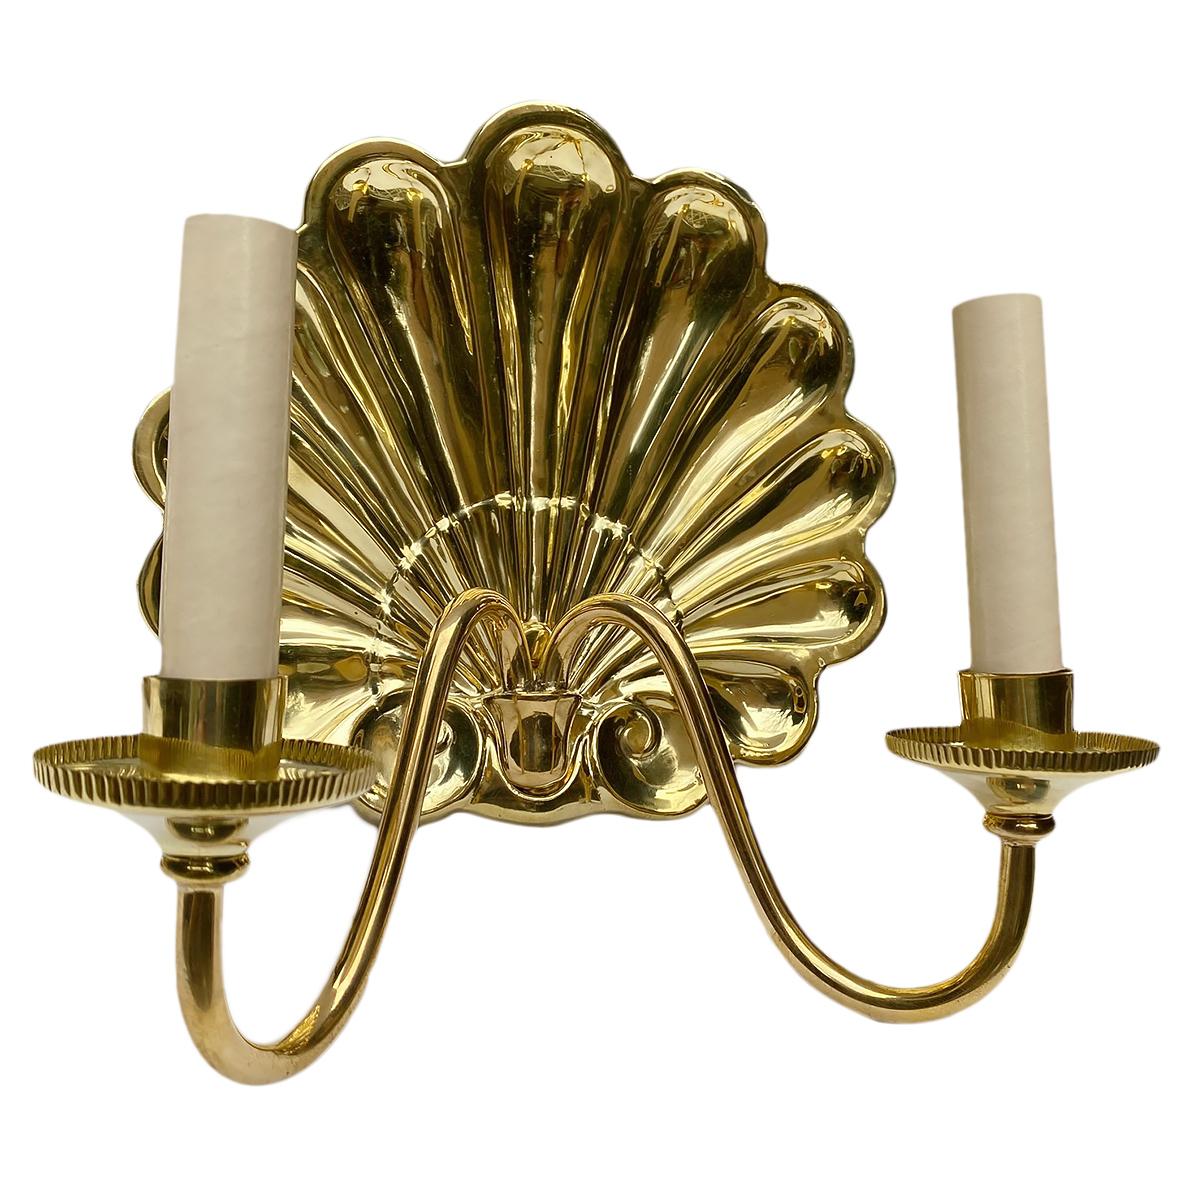 Set of four circa 1950's French repousse' and polished brass two-light sconces with shell motif backplate. Sold per pair.
Measurements:
Height: 10.5